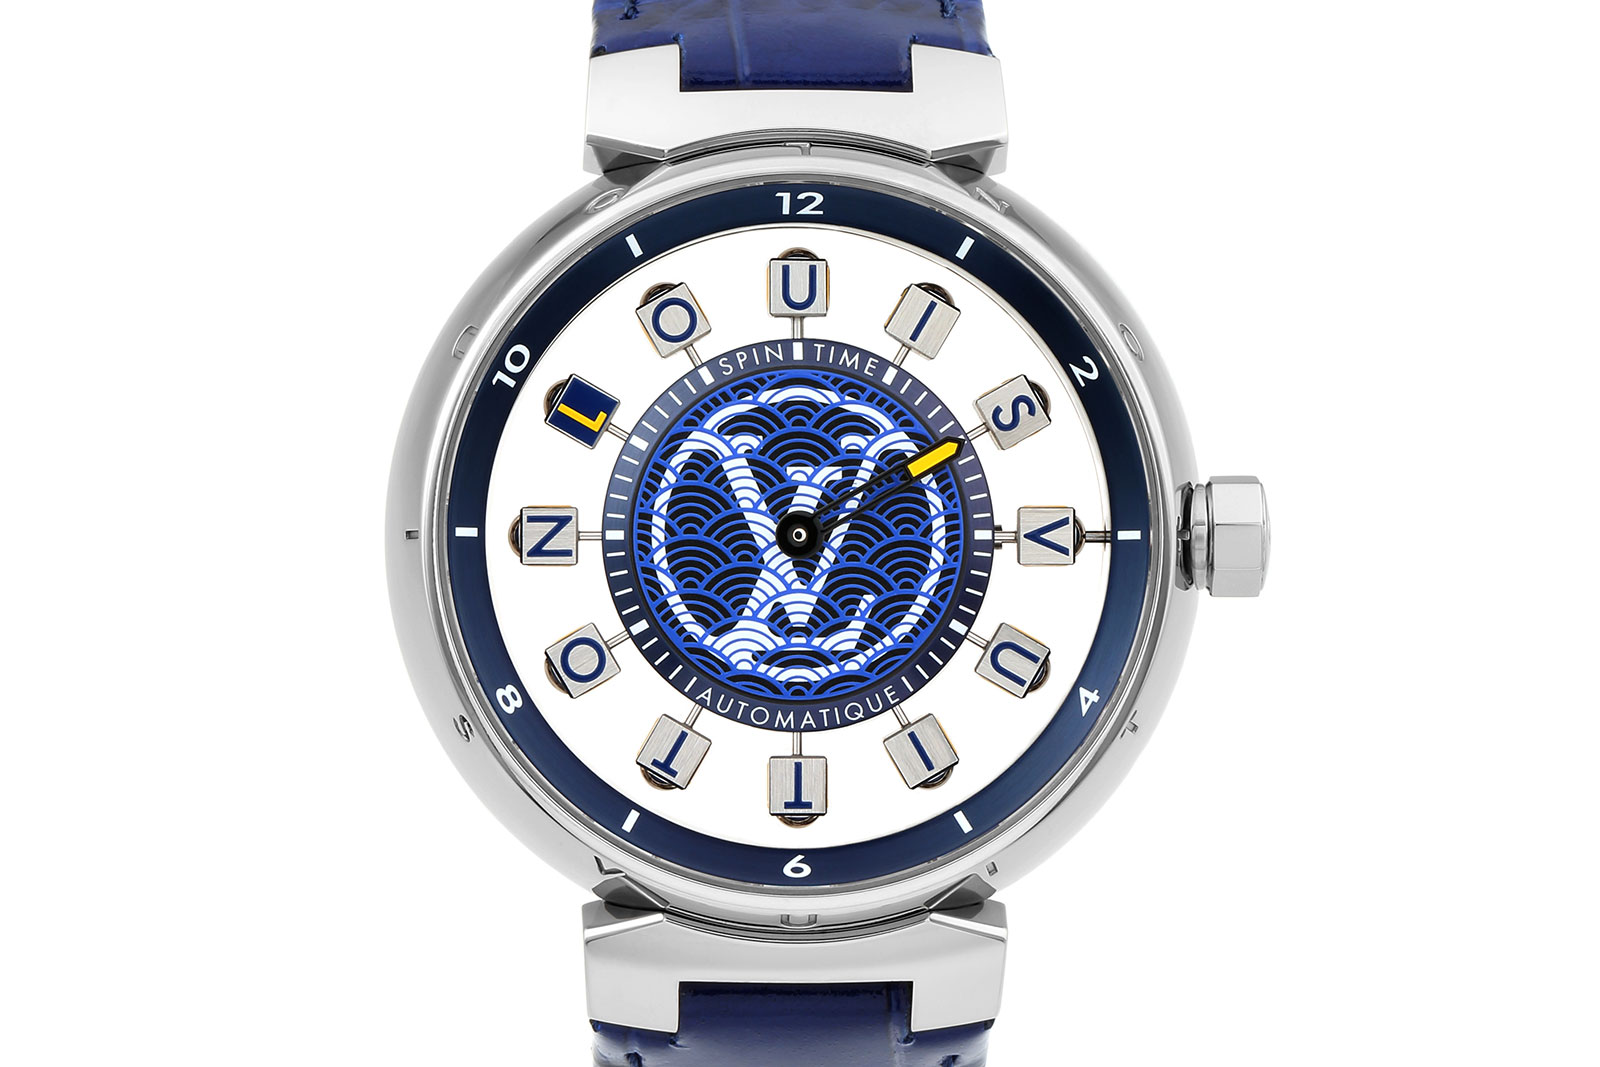 Louis Vuitton Introduces the Tambour Spin Time Air Japan Edition | SJX Watches